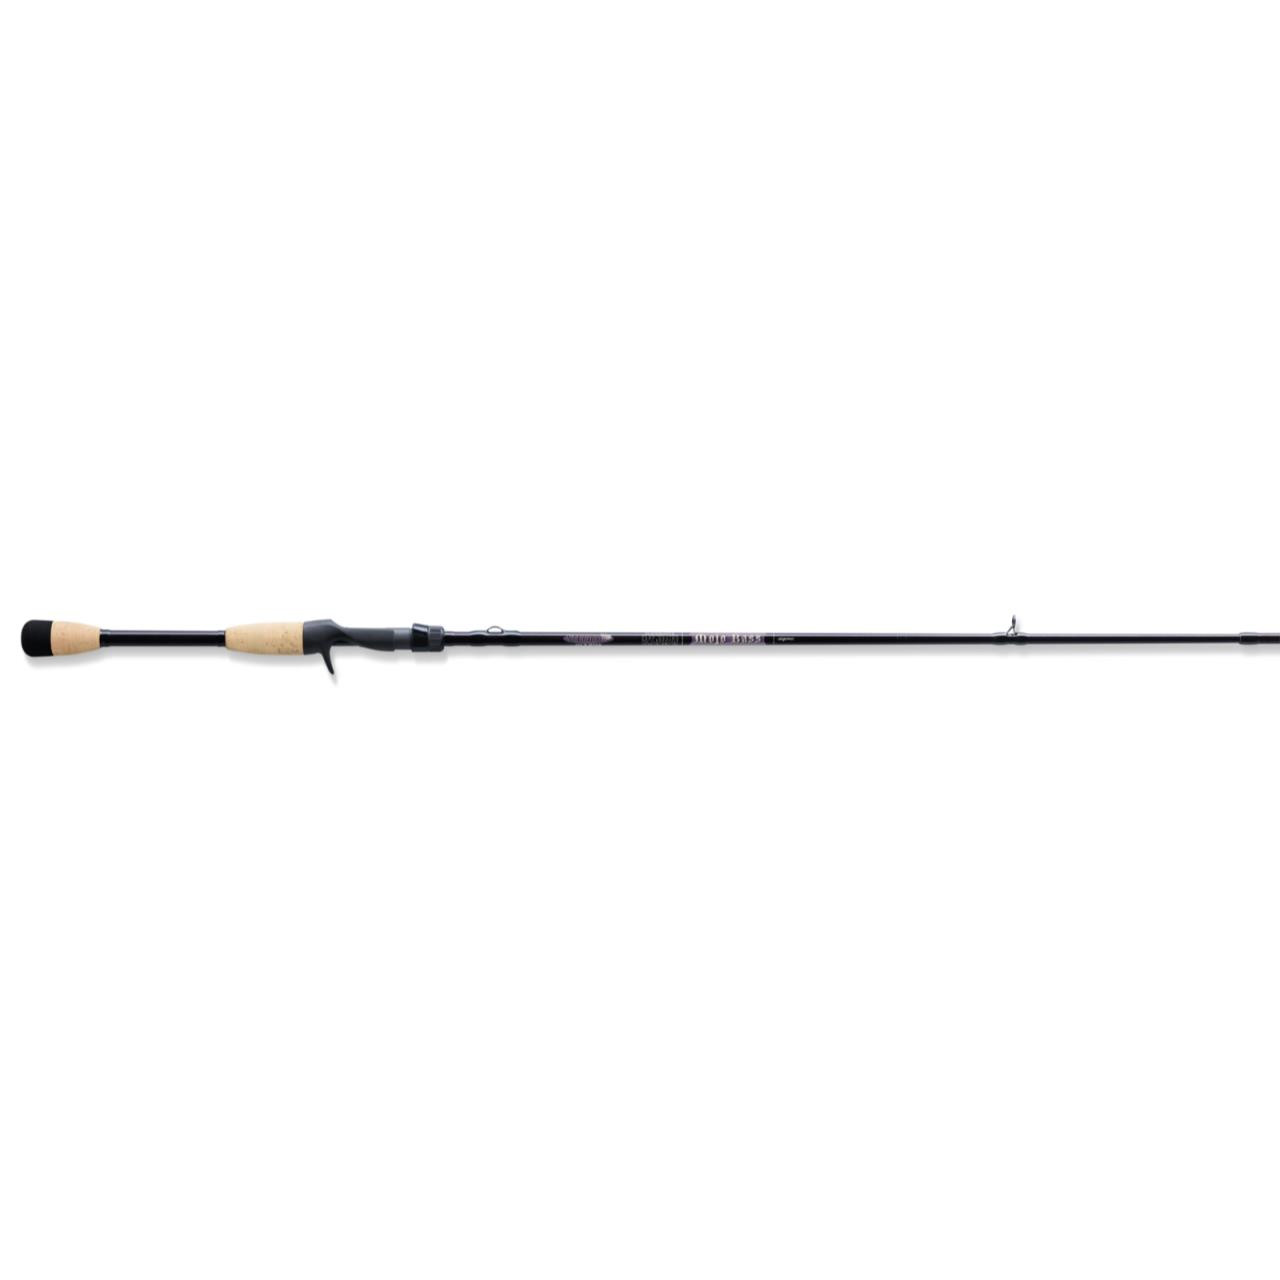 https://cdn11.bigcommerce.com/s-70mih4s/images/stencil/1280x1280/products/13495/51260/St-Croix-Mojo-Bass-Casting-Rods-78064708827_image1__90840.1616709847.jpg?c=2